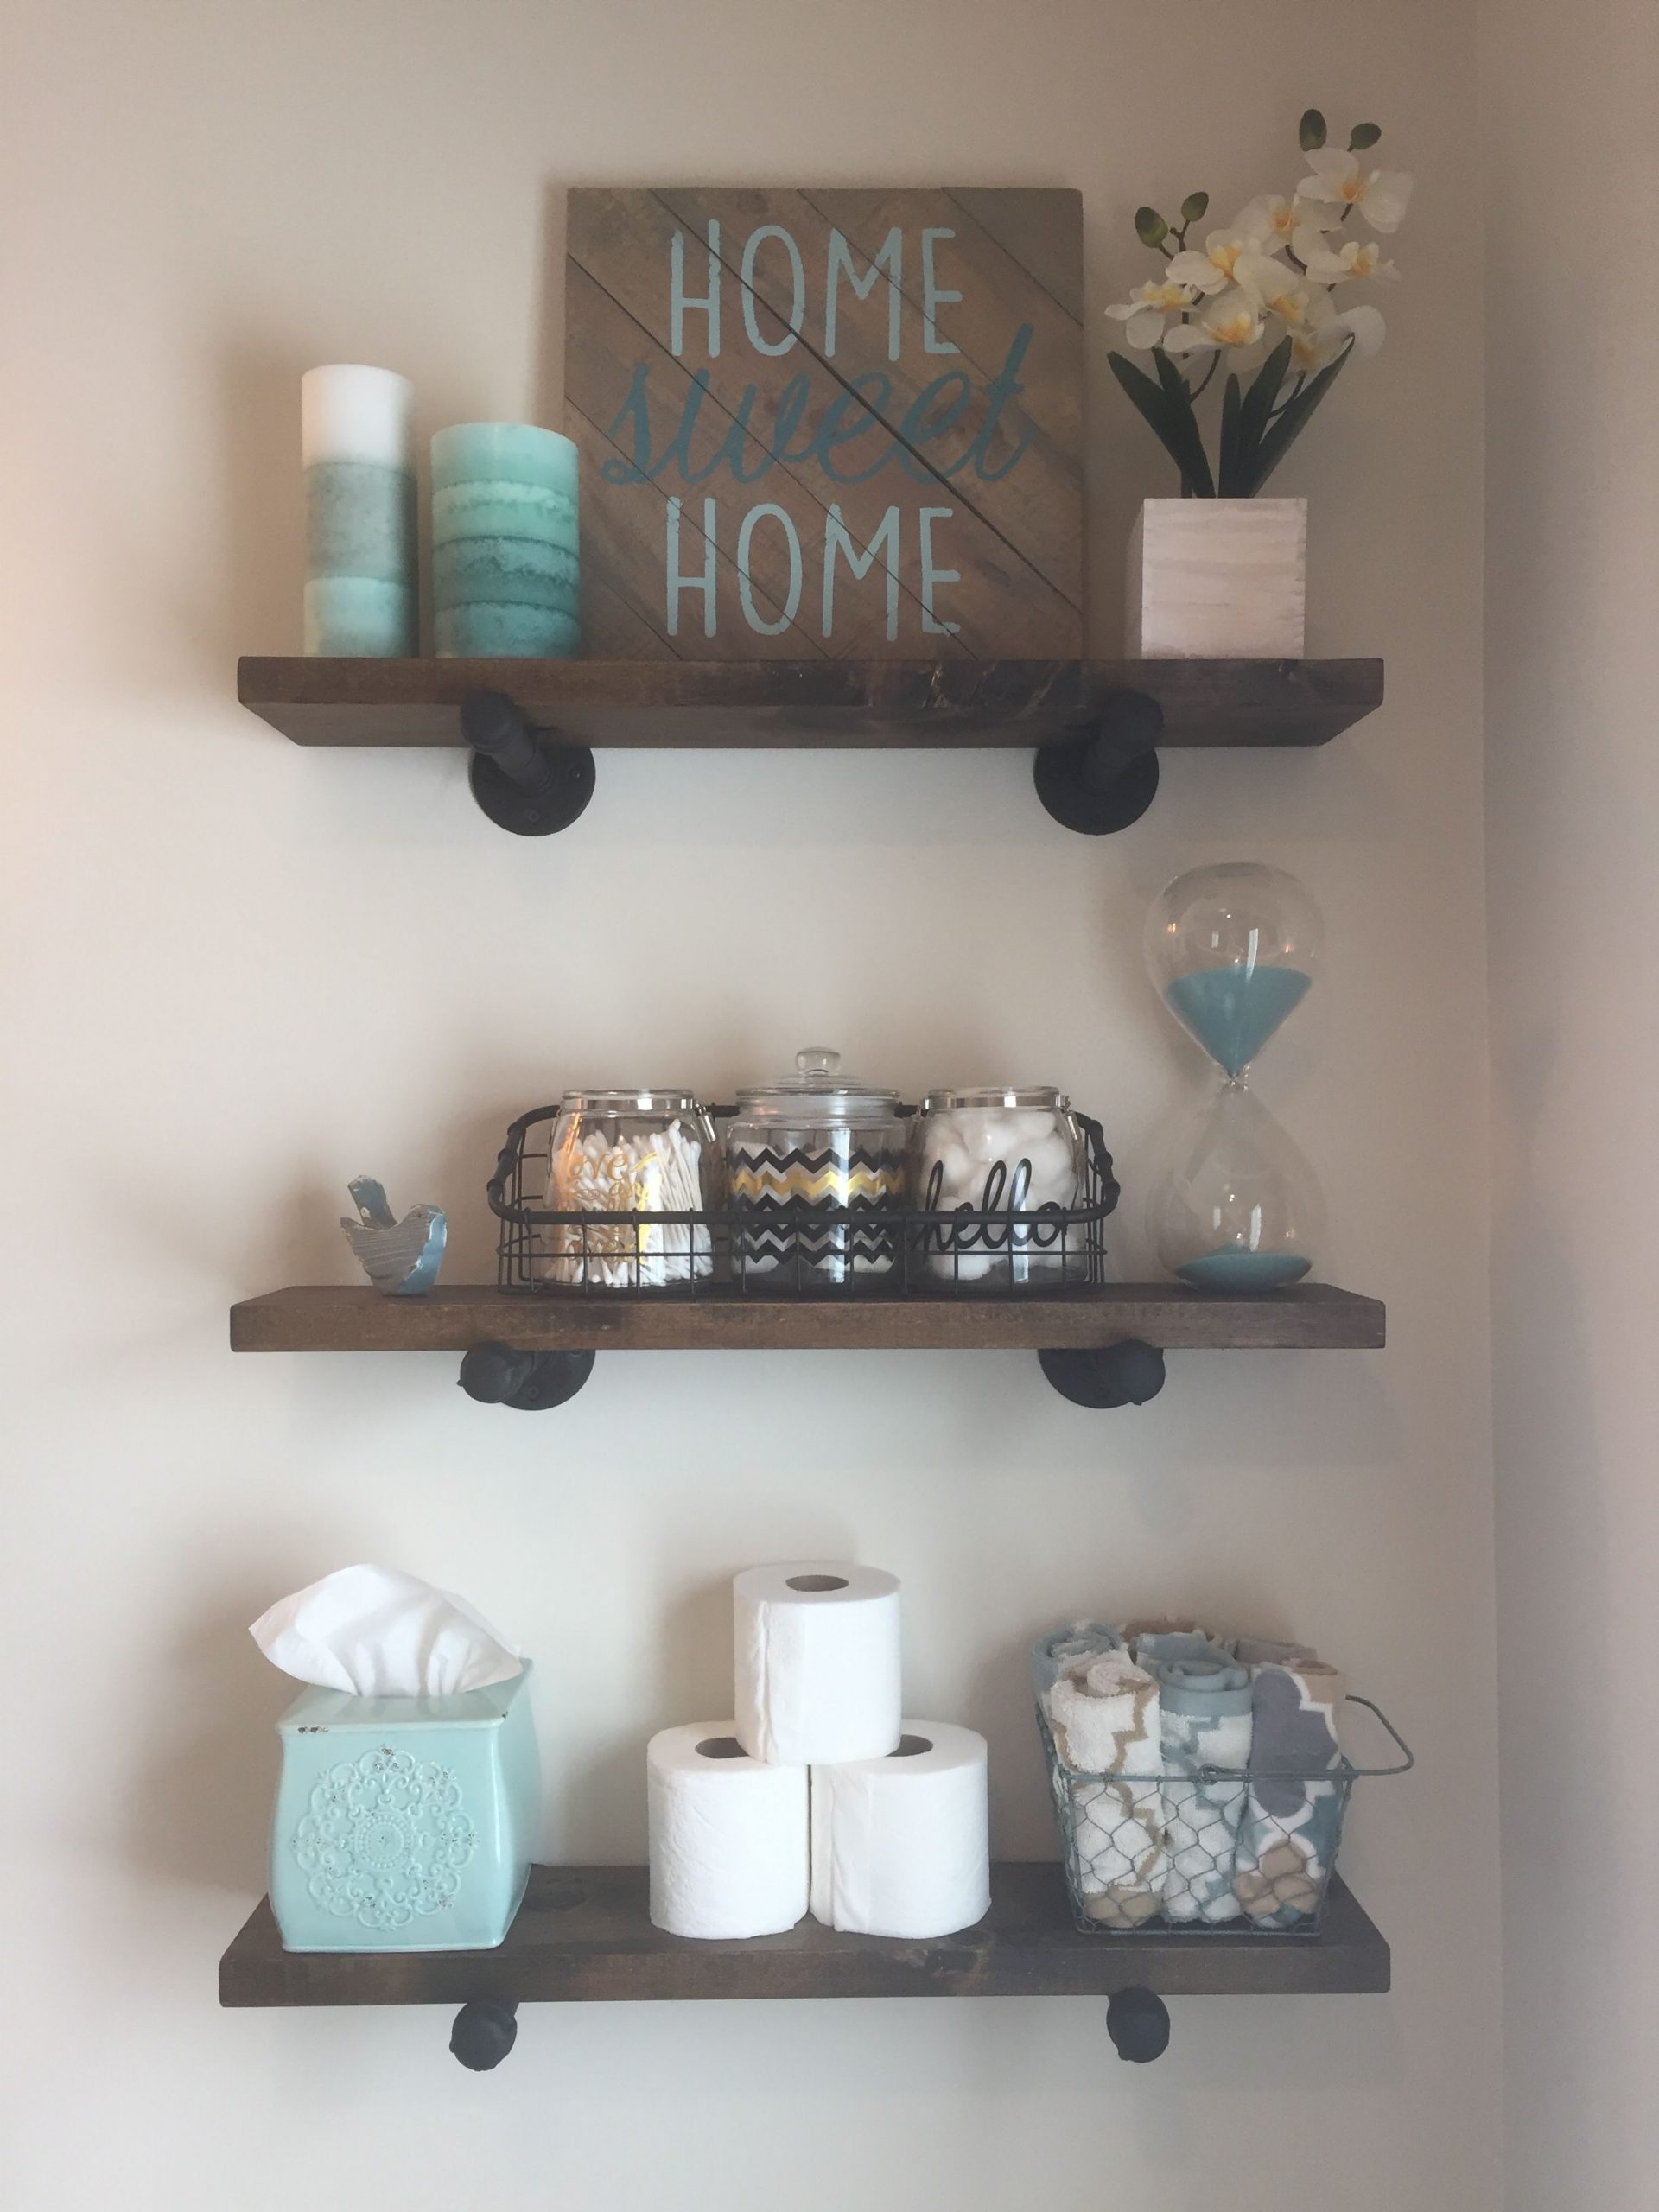 Open Shelves And Aged Accents: Rustic Decor For Bathrooms